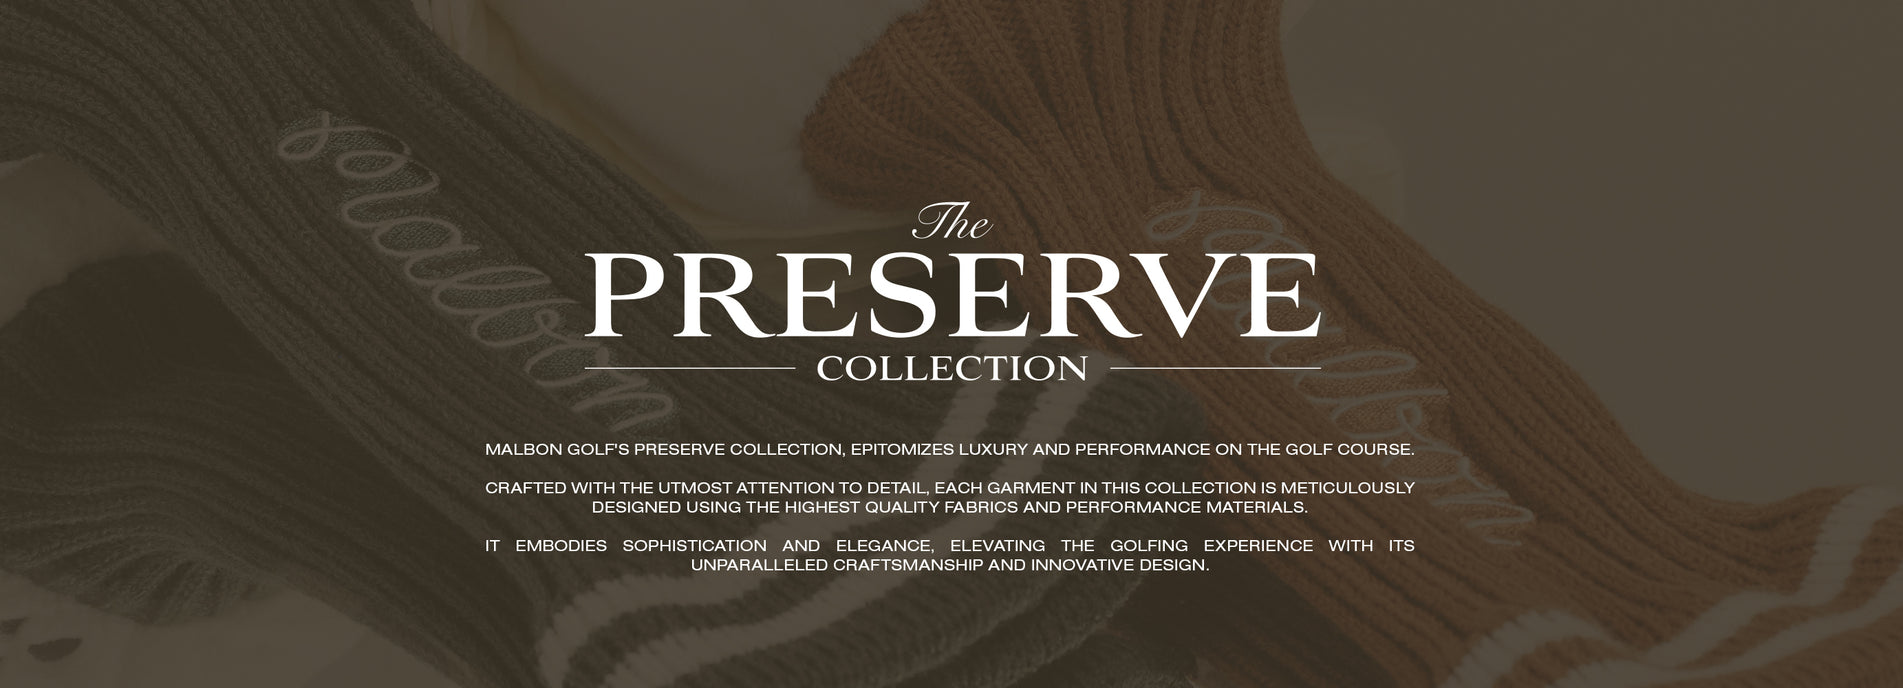 The Preserve Collection - Womens